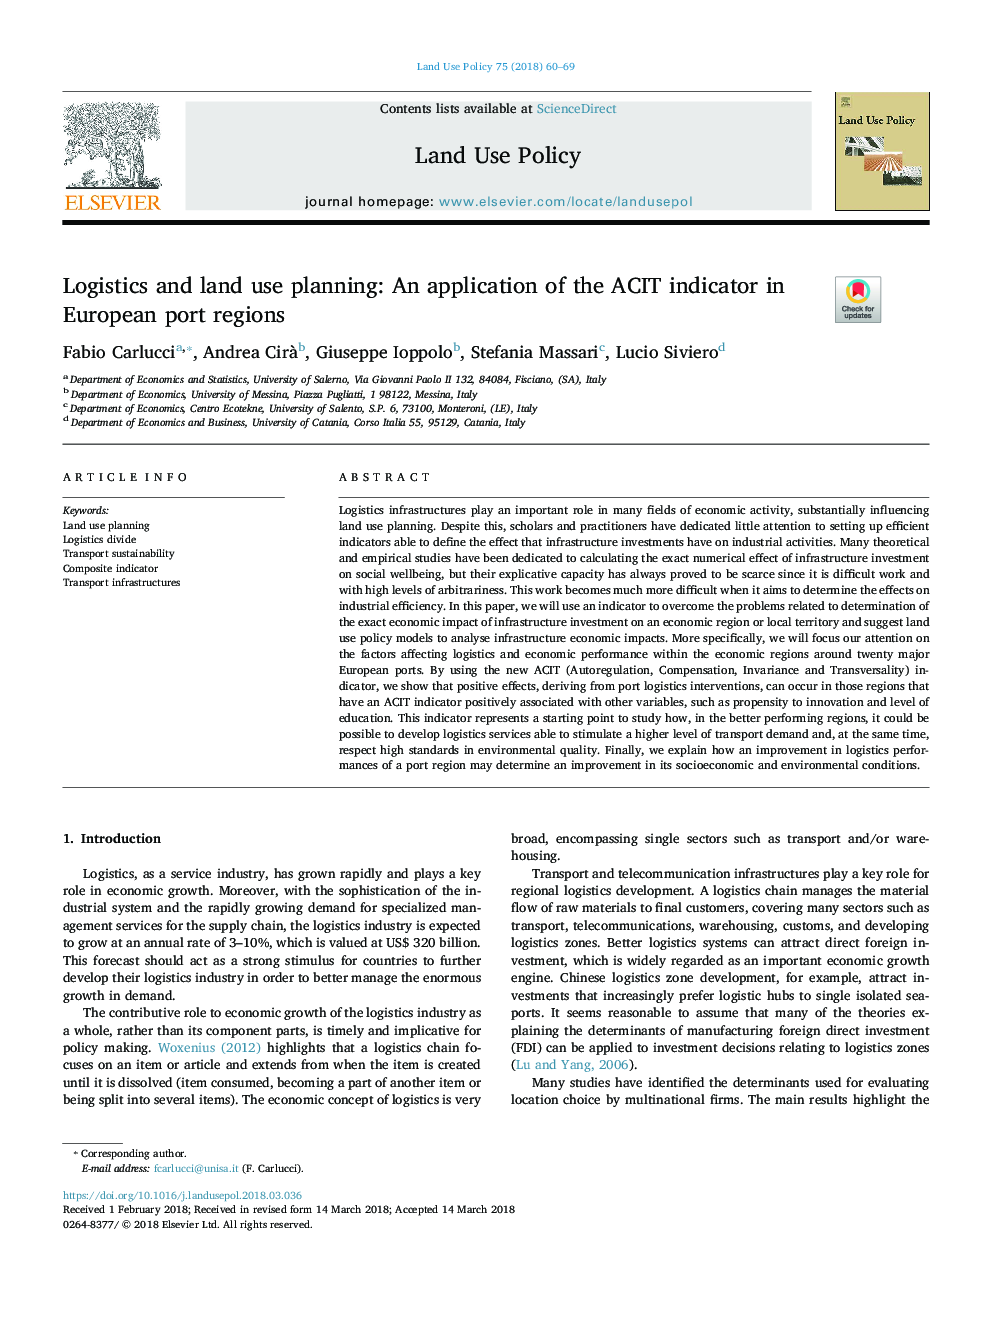 Logistics and land use planning: An application of the ACIT indicator in European port regions